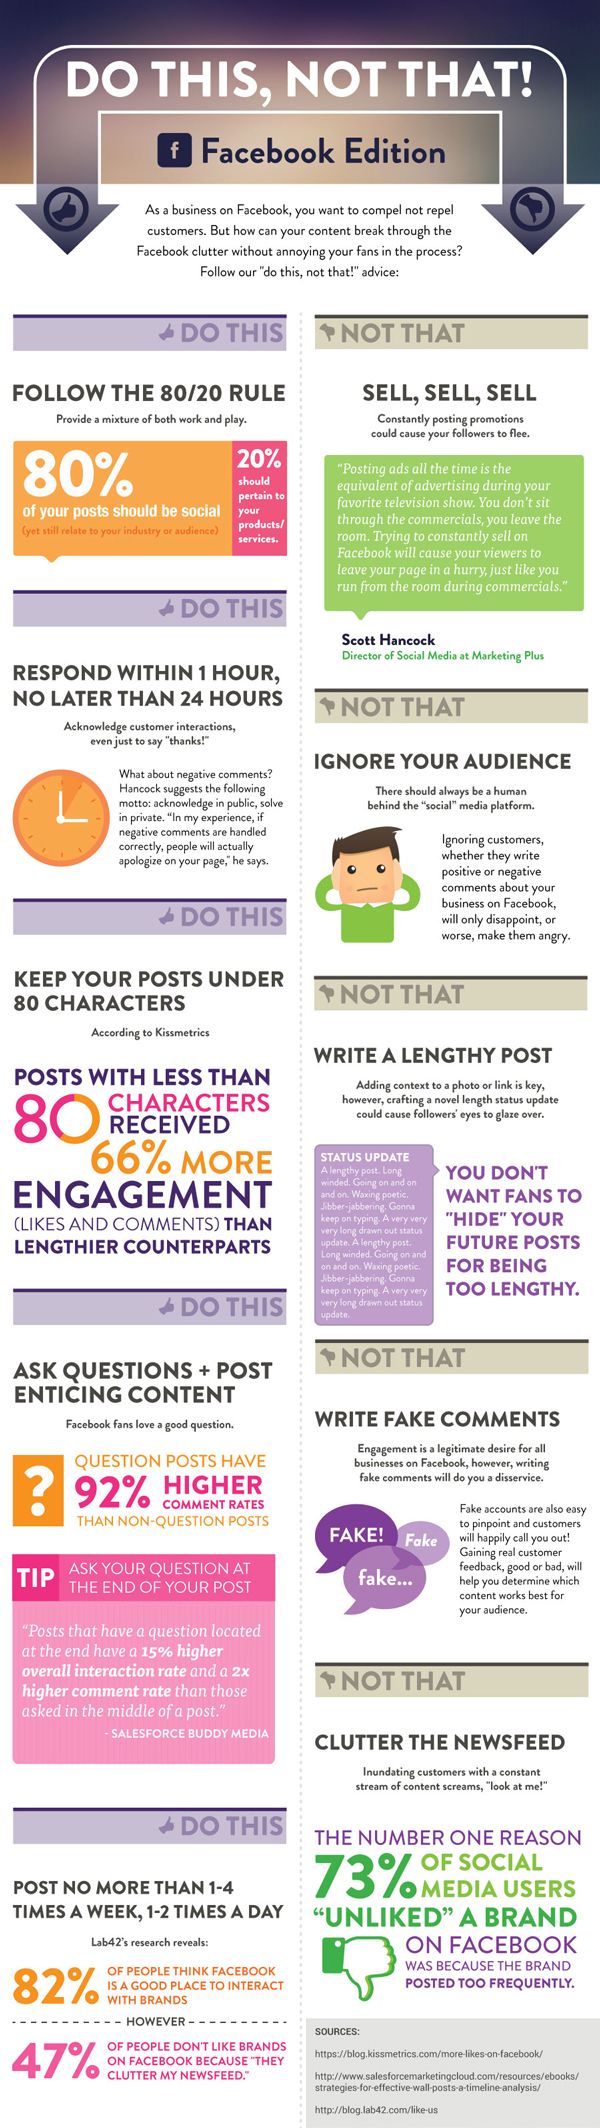 Facebook Infographic: Do This Not That on Facebook